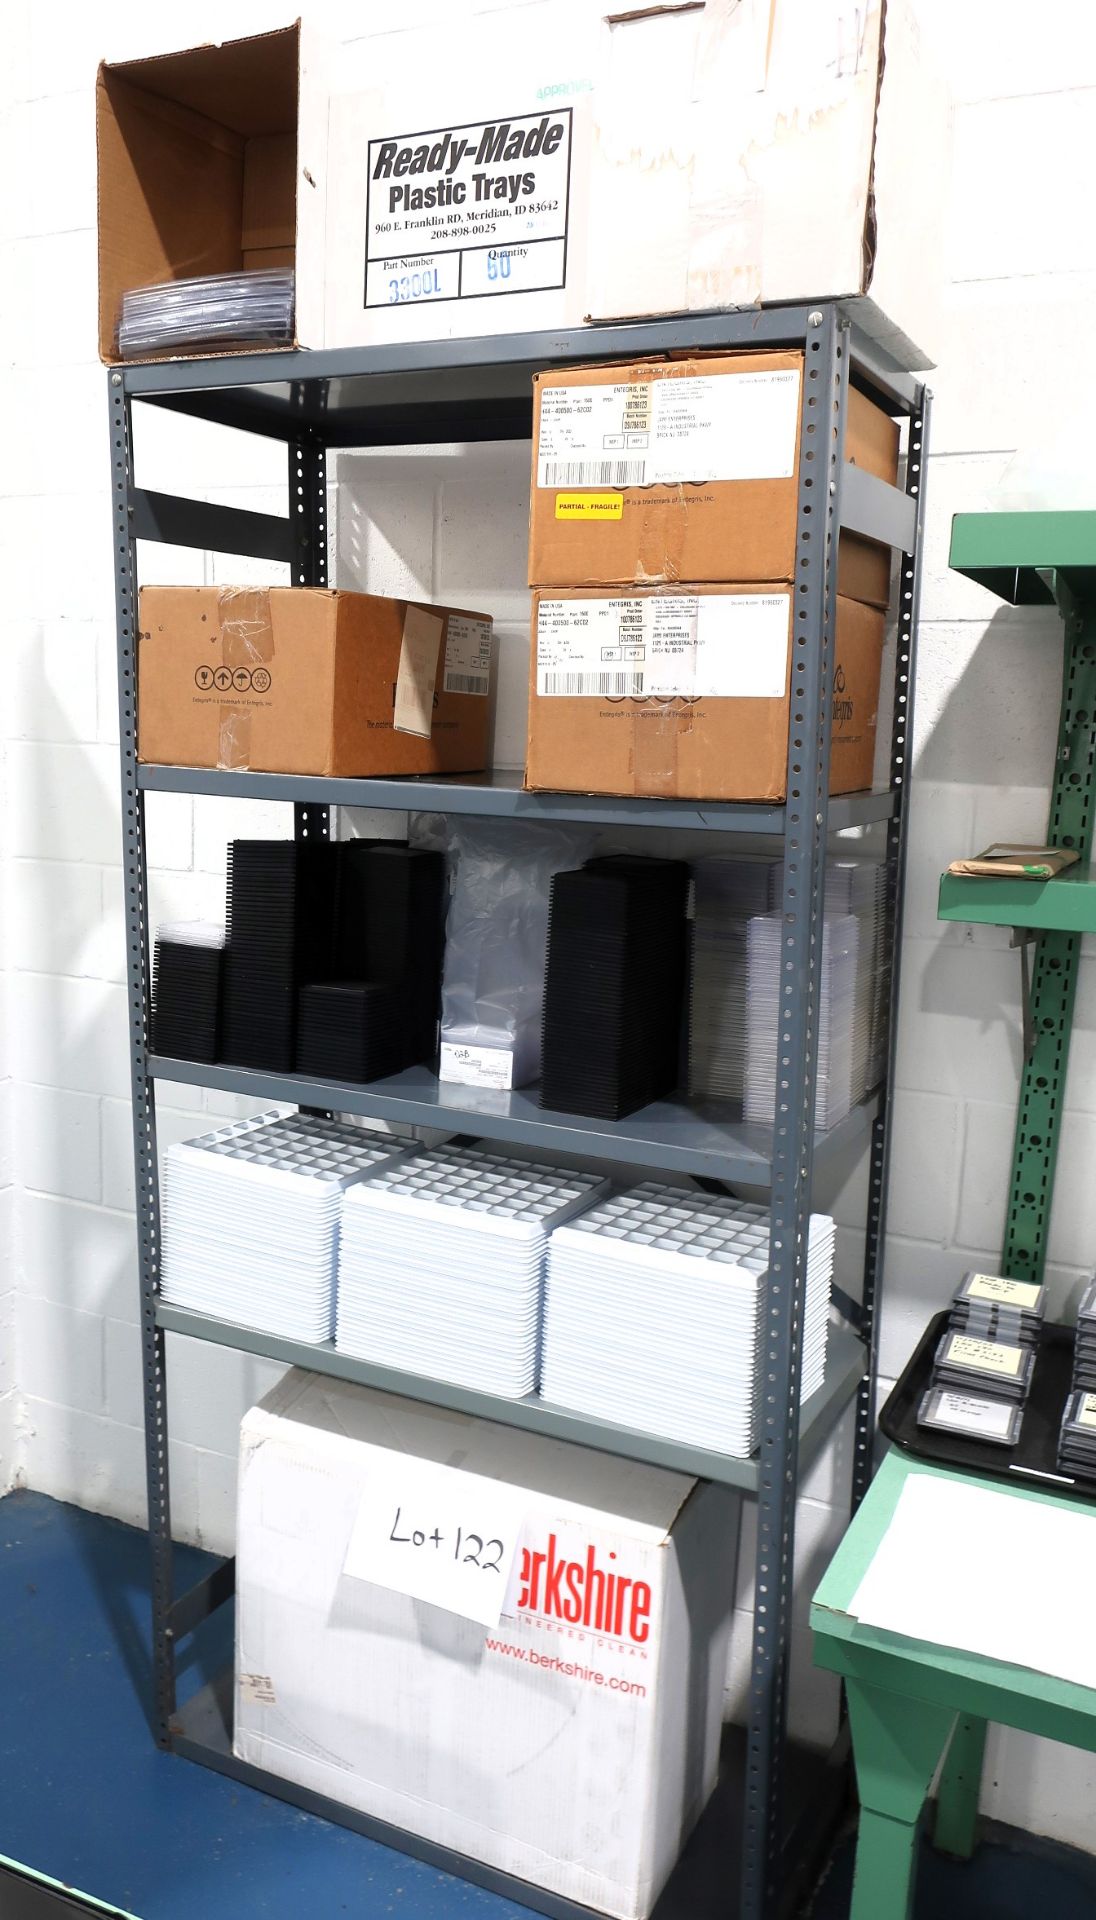 Metal Shelving Unit, Box of Berkshire Cleanroom Non-Woven Polyester/Cellulose Towels, Plastic Trays